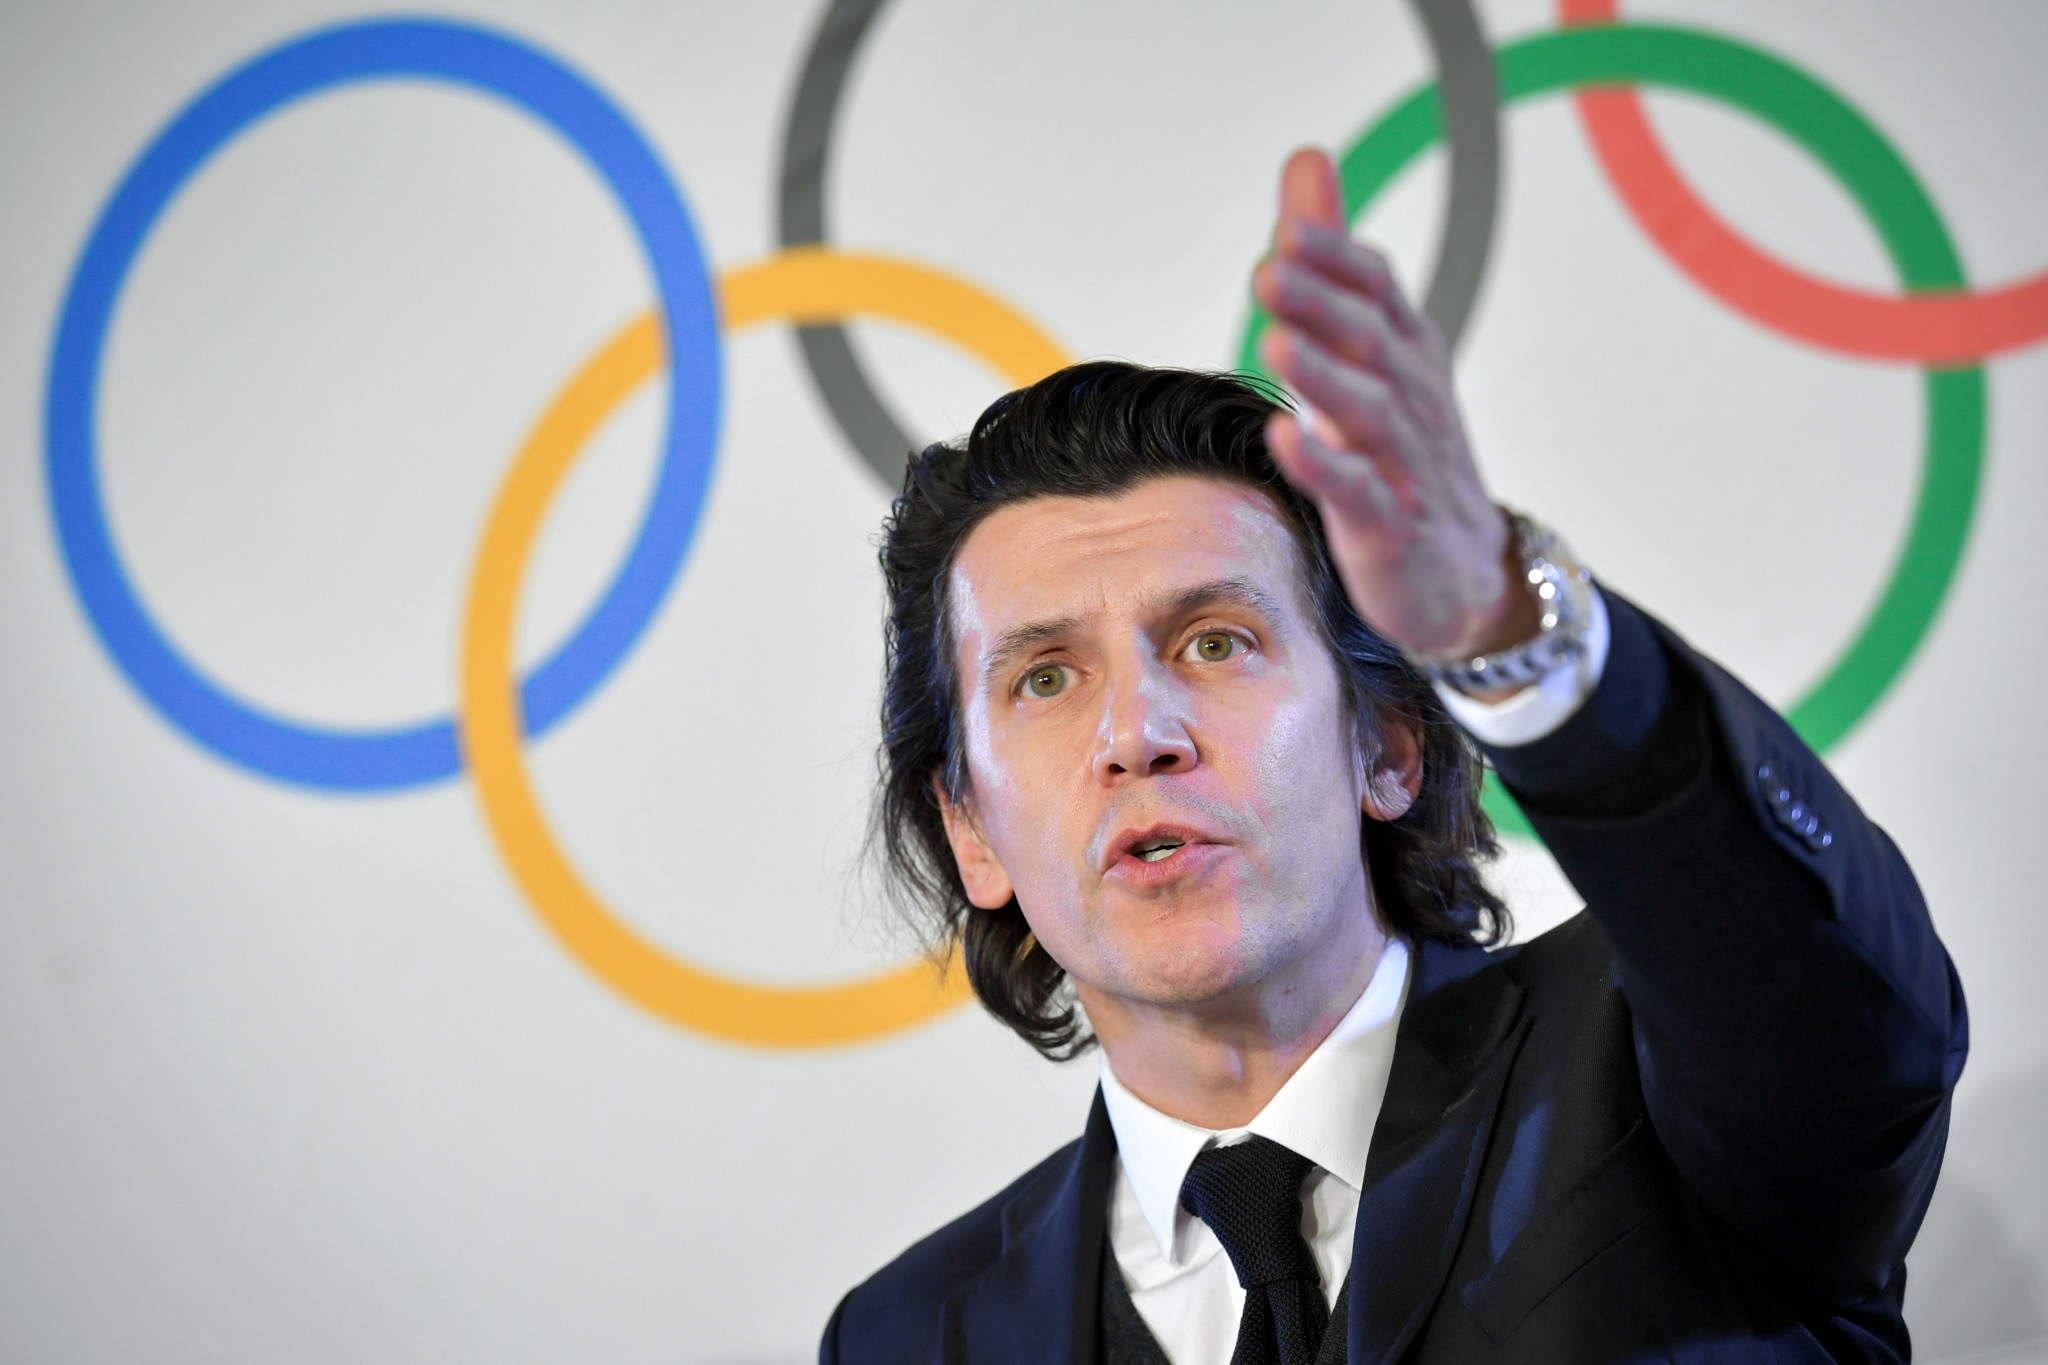 IOC Executive Director for Olympic Games Christophe Dubi claimed he is confident about ticket sales for Pyeongchang 2018 following a recent upsurge coinciding with the arrival of the Olympic Torch ©Getty Images